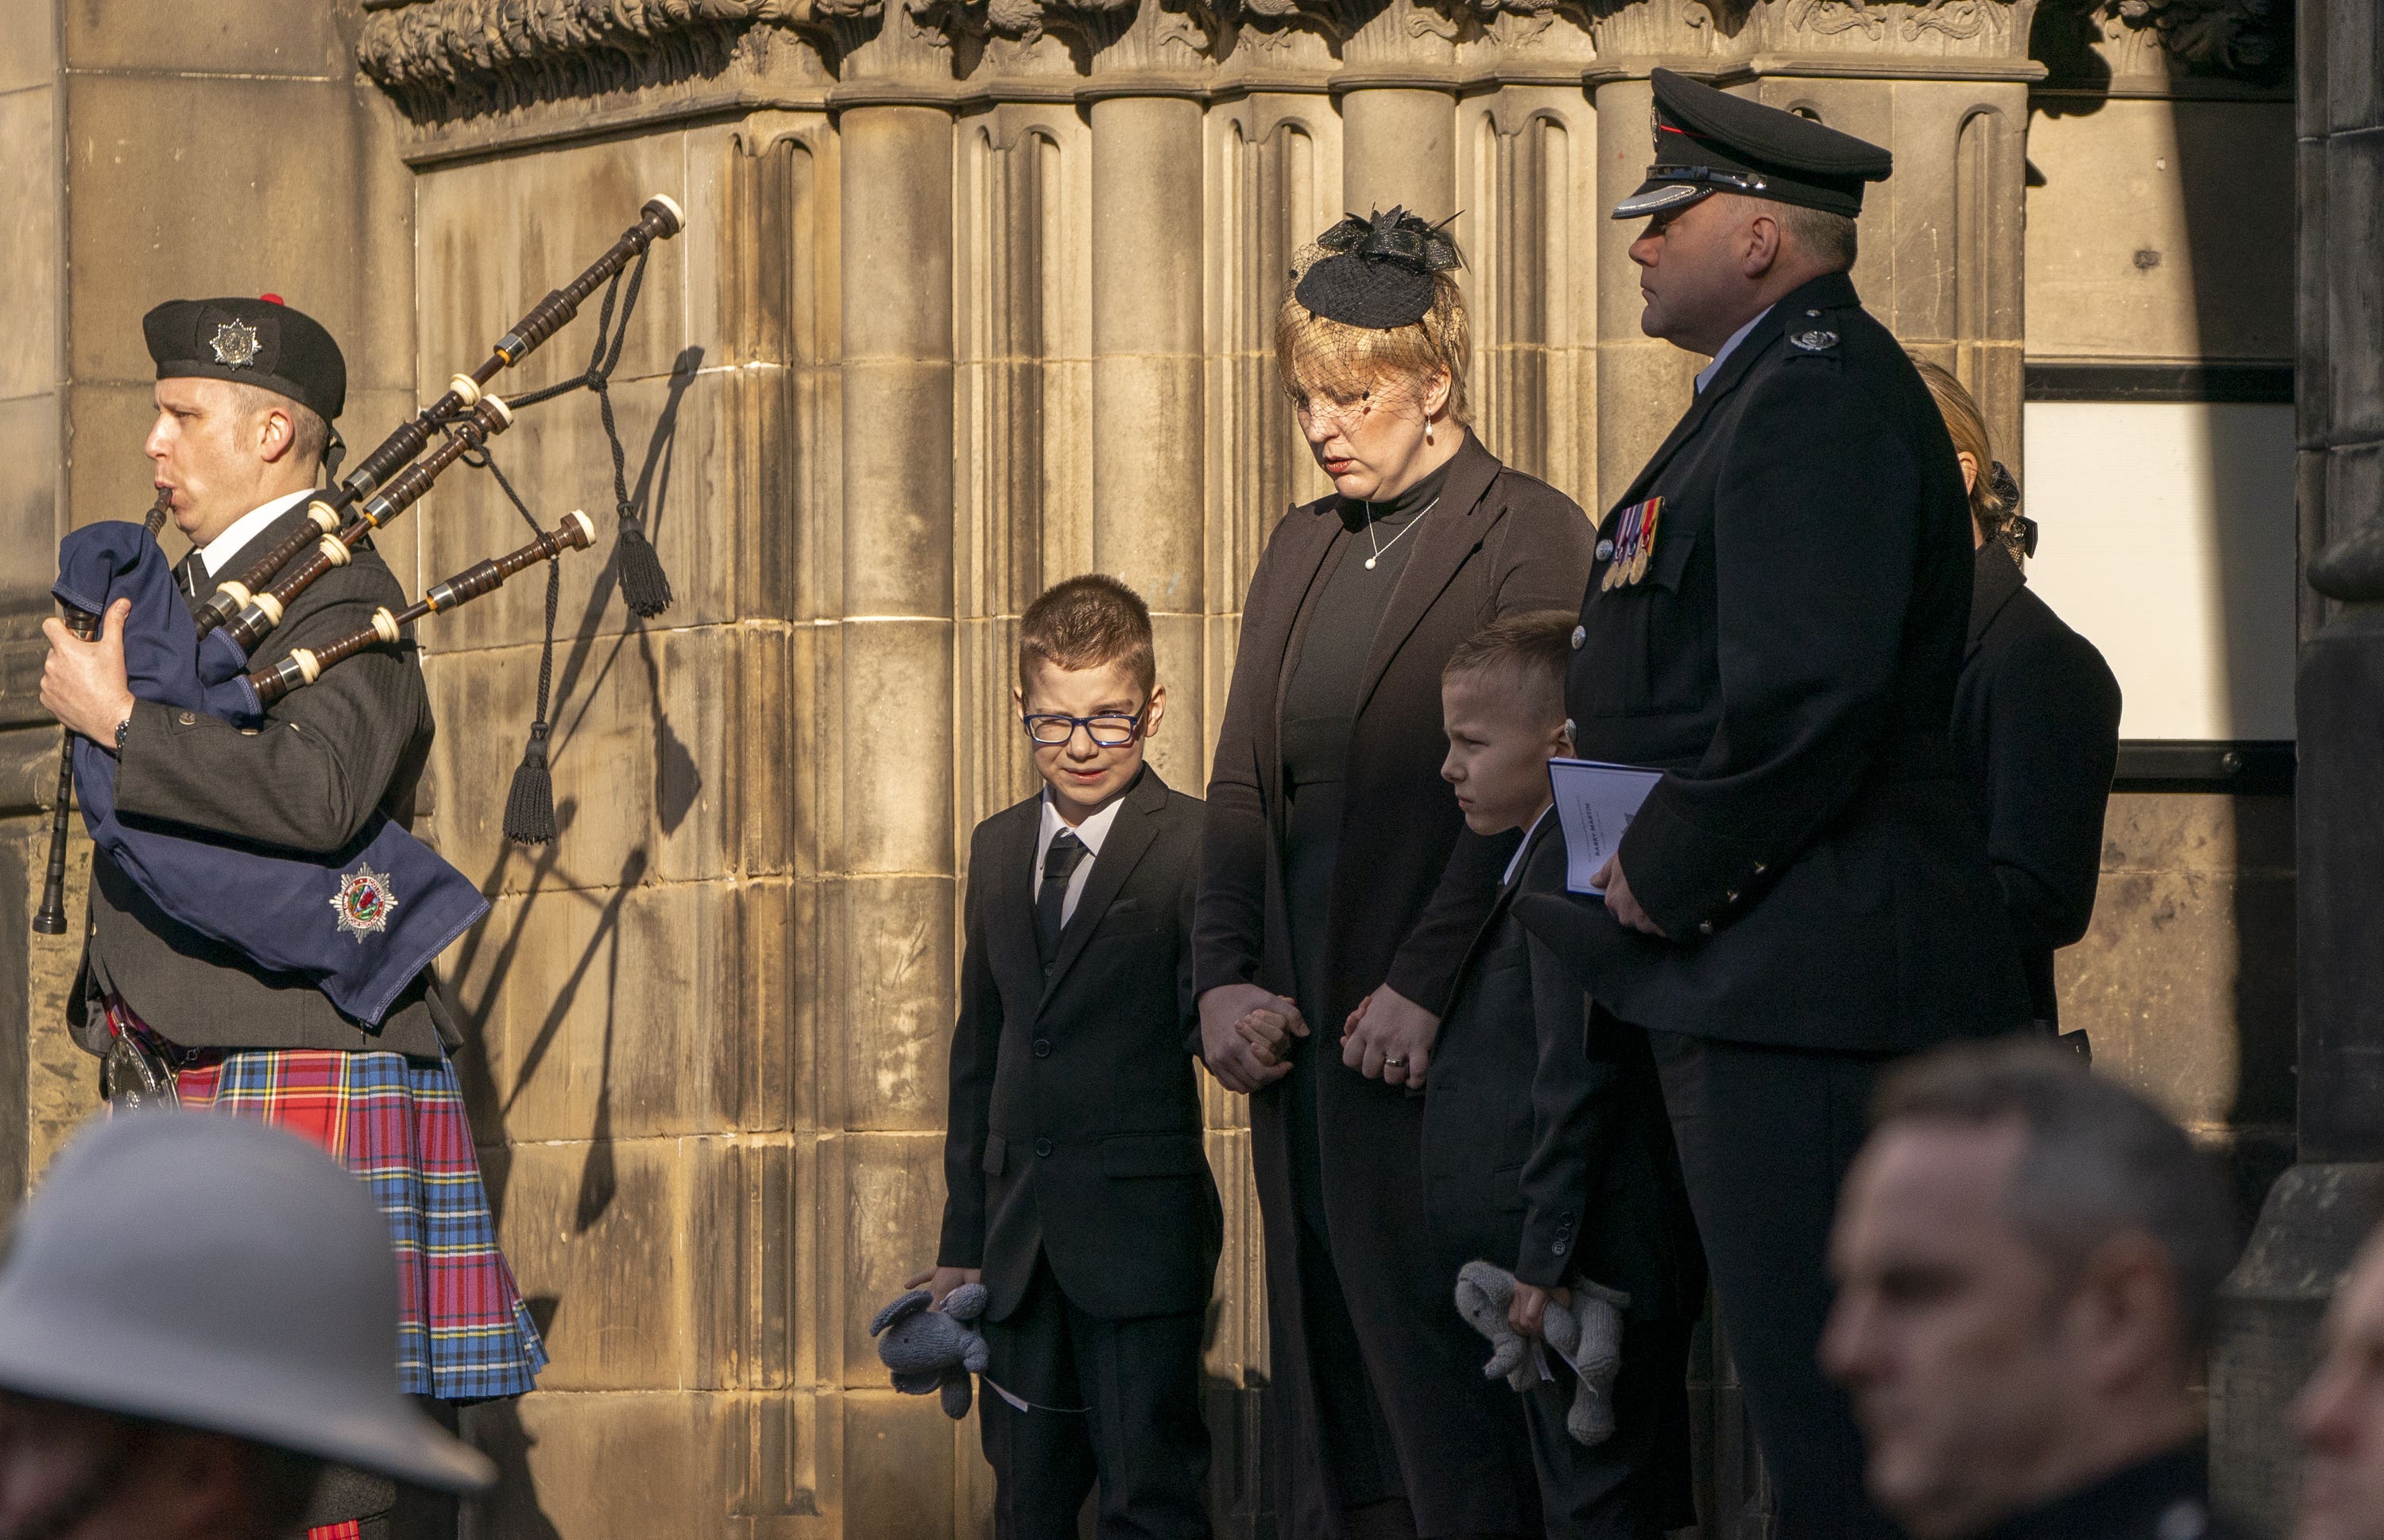 Shelley Martin, widow of Barry Martin, with their twin sons Oliver and Daniel at his funeral in Edinburgh